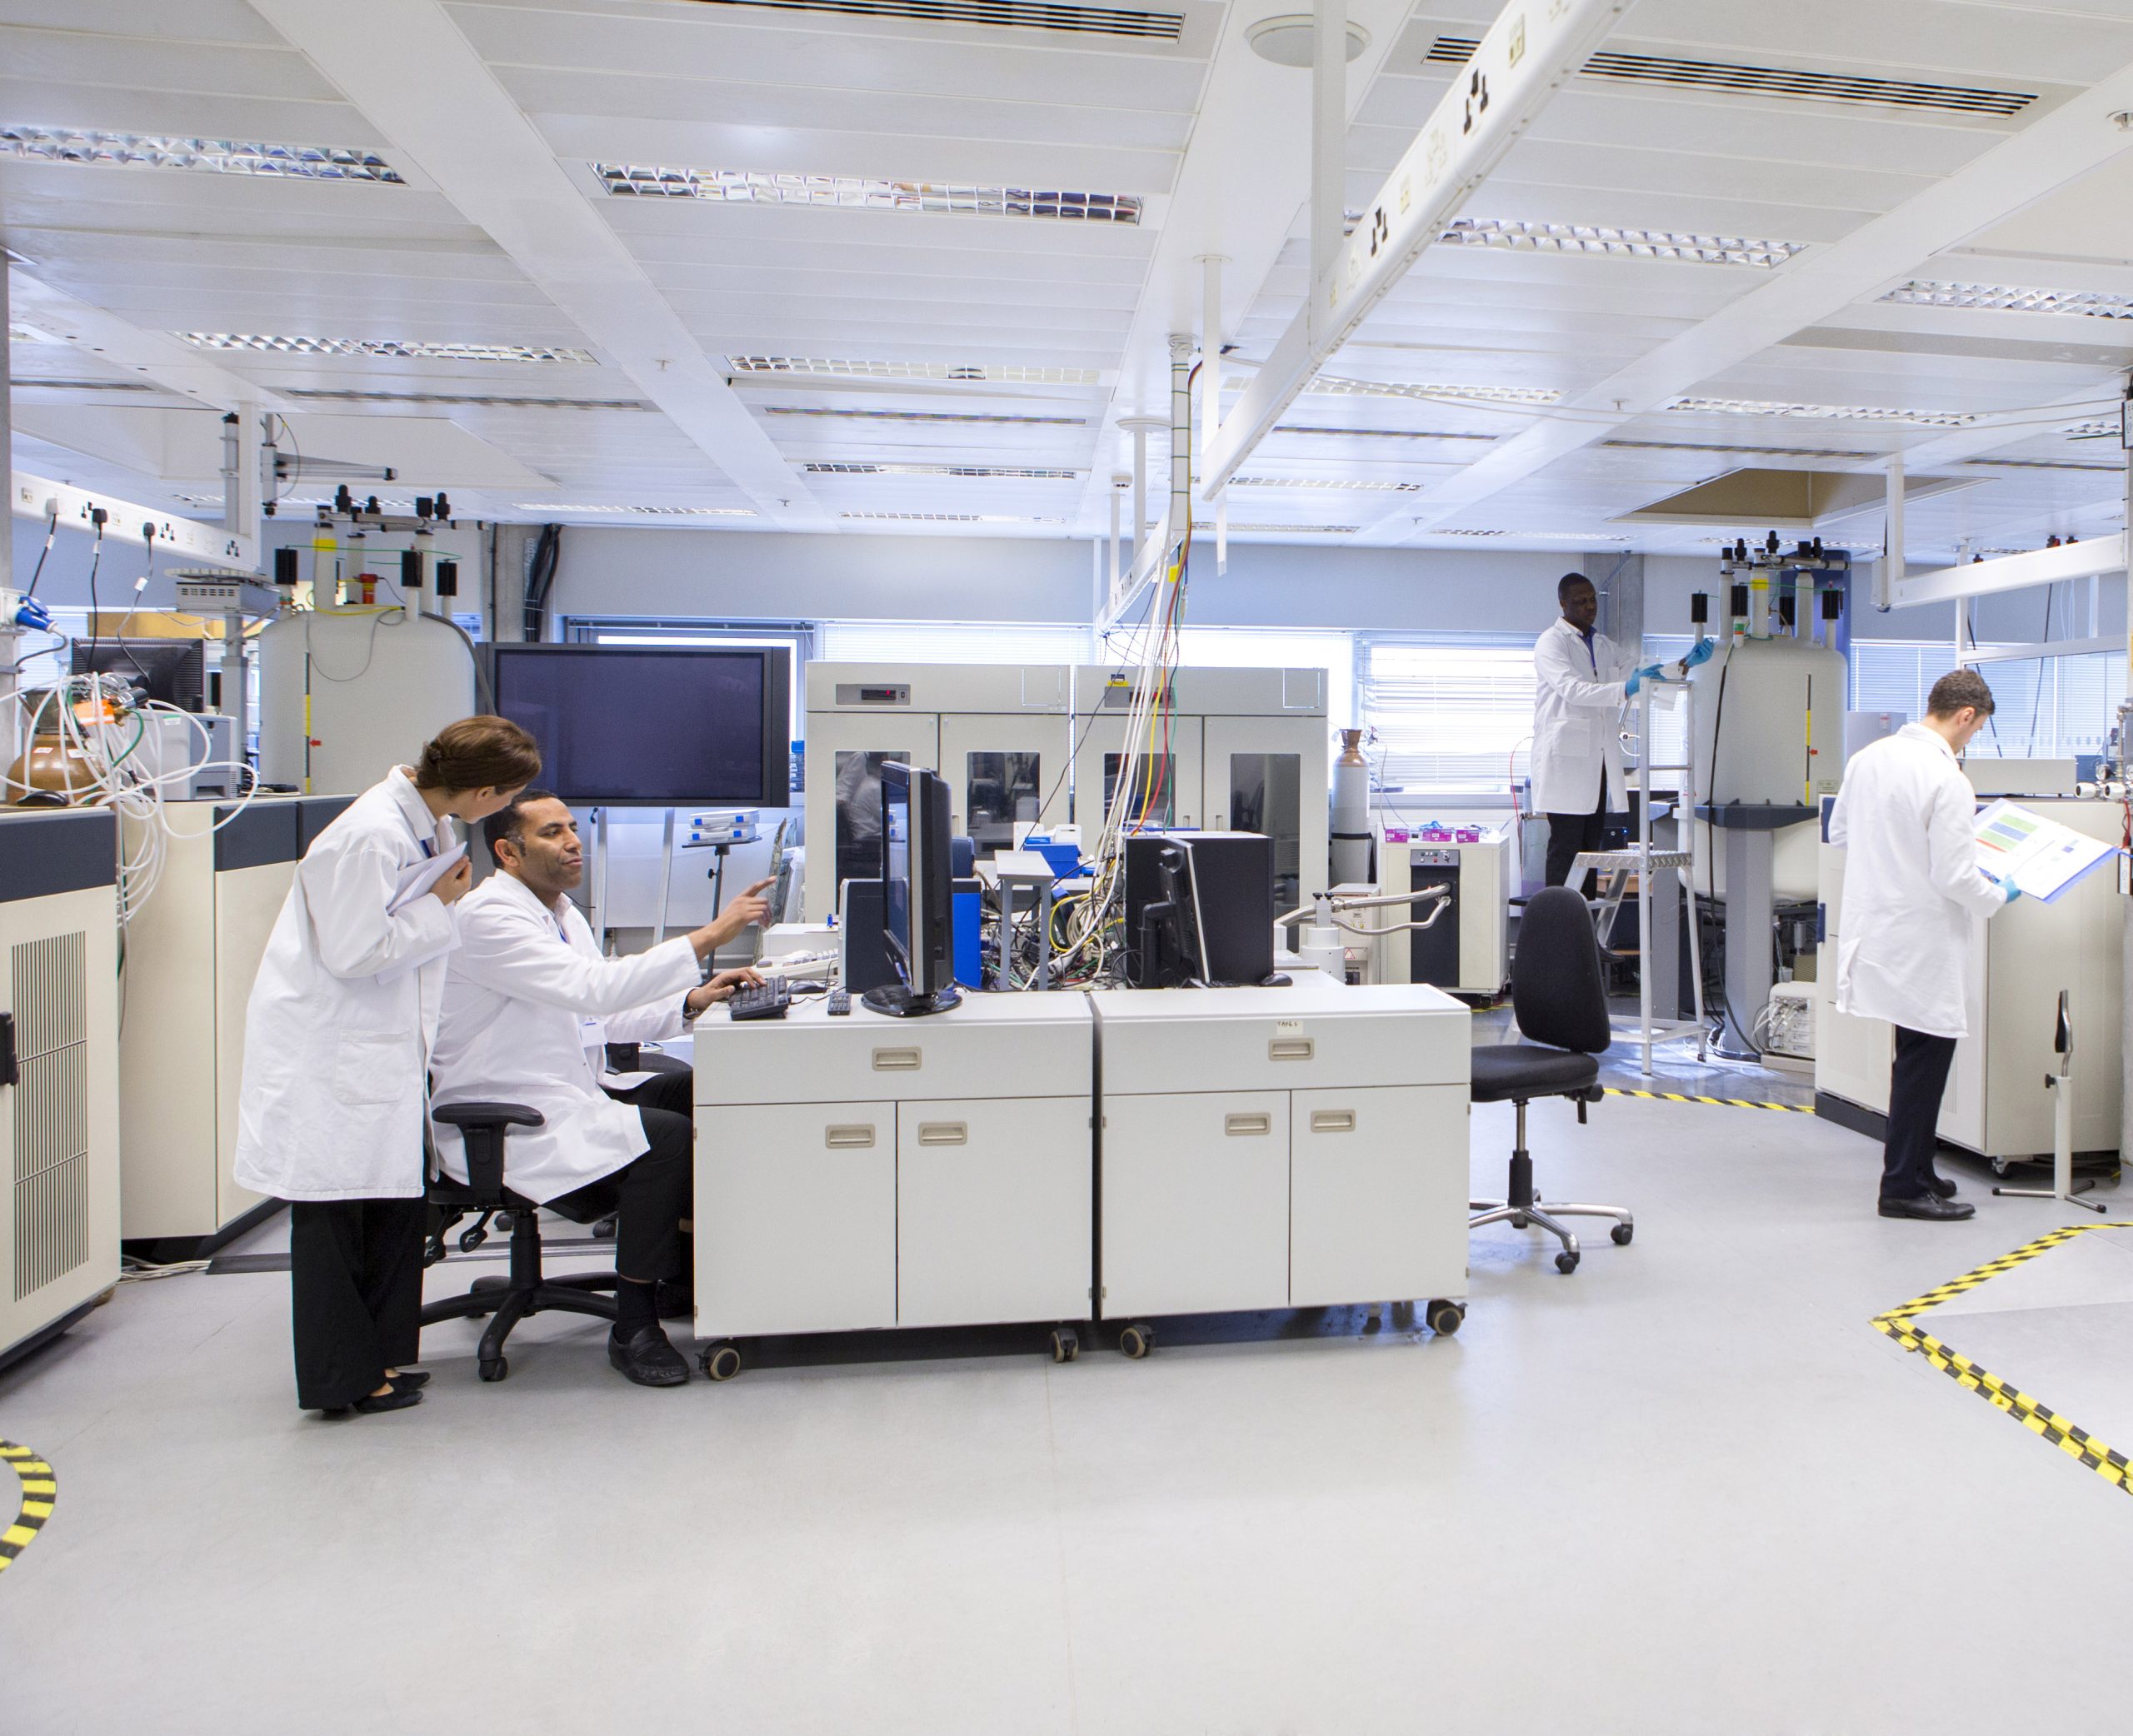 Scientists wearing white coats working in an open plan laboratory designed for optimal laboratory indoor air quality.